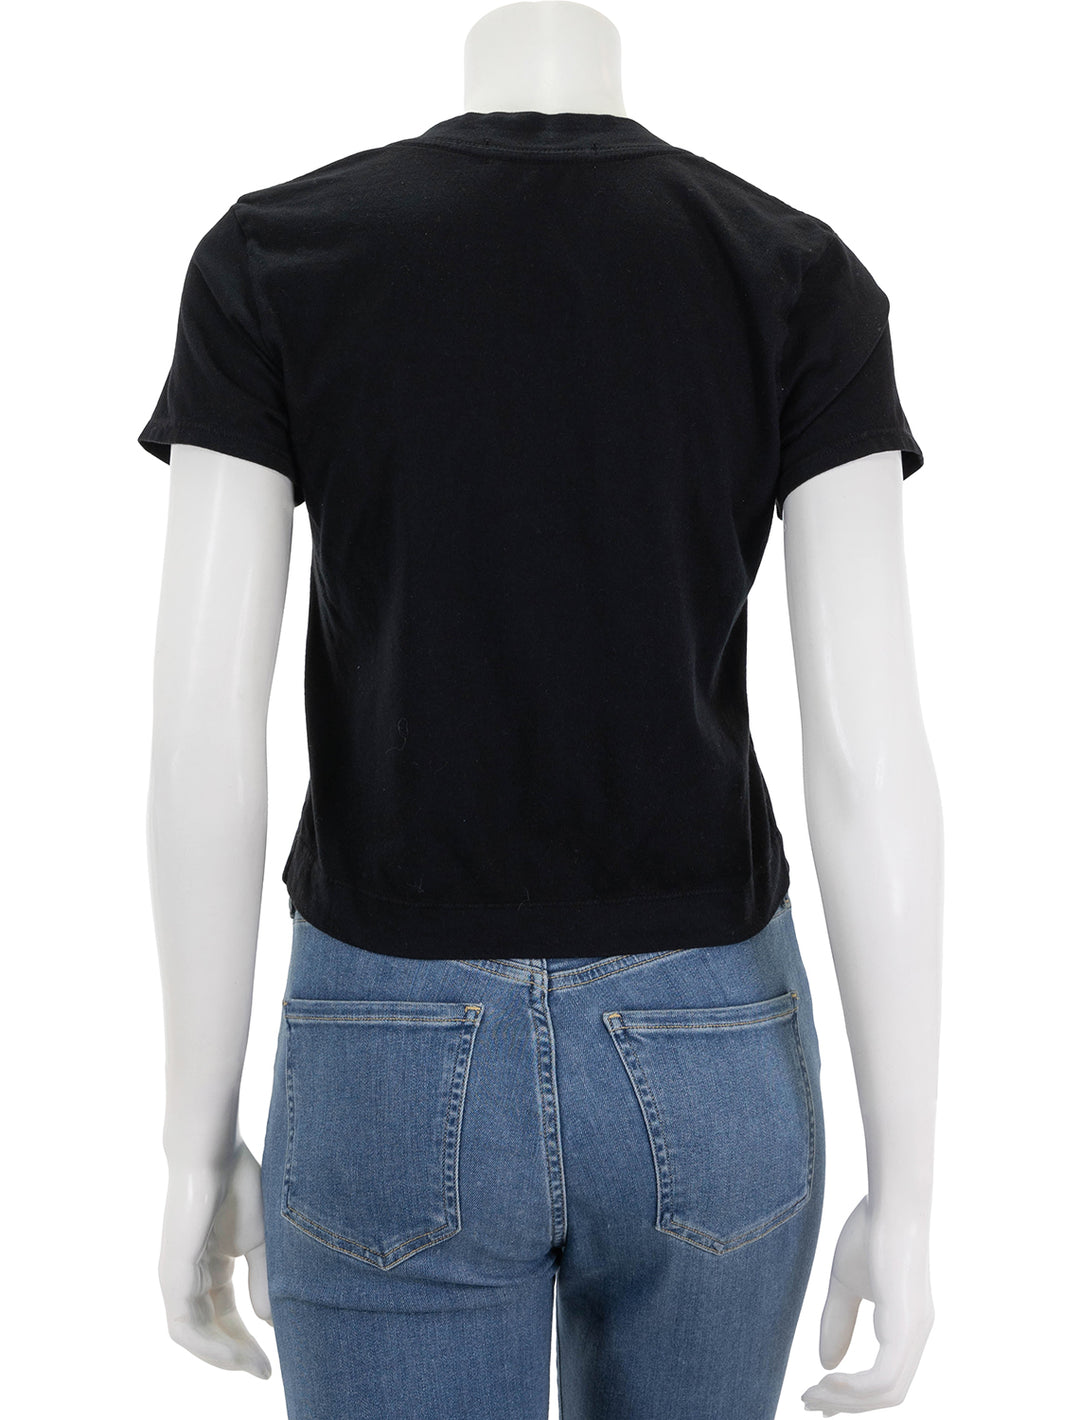 Back view of Perfectwhitetee's frankie tee in black.